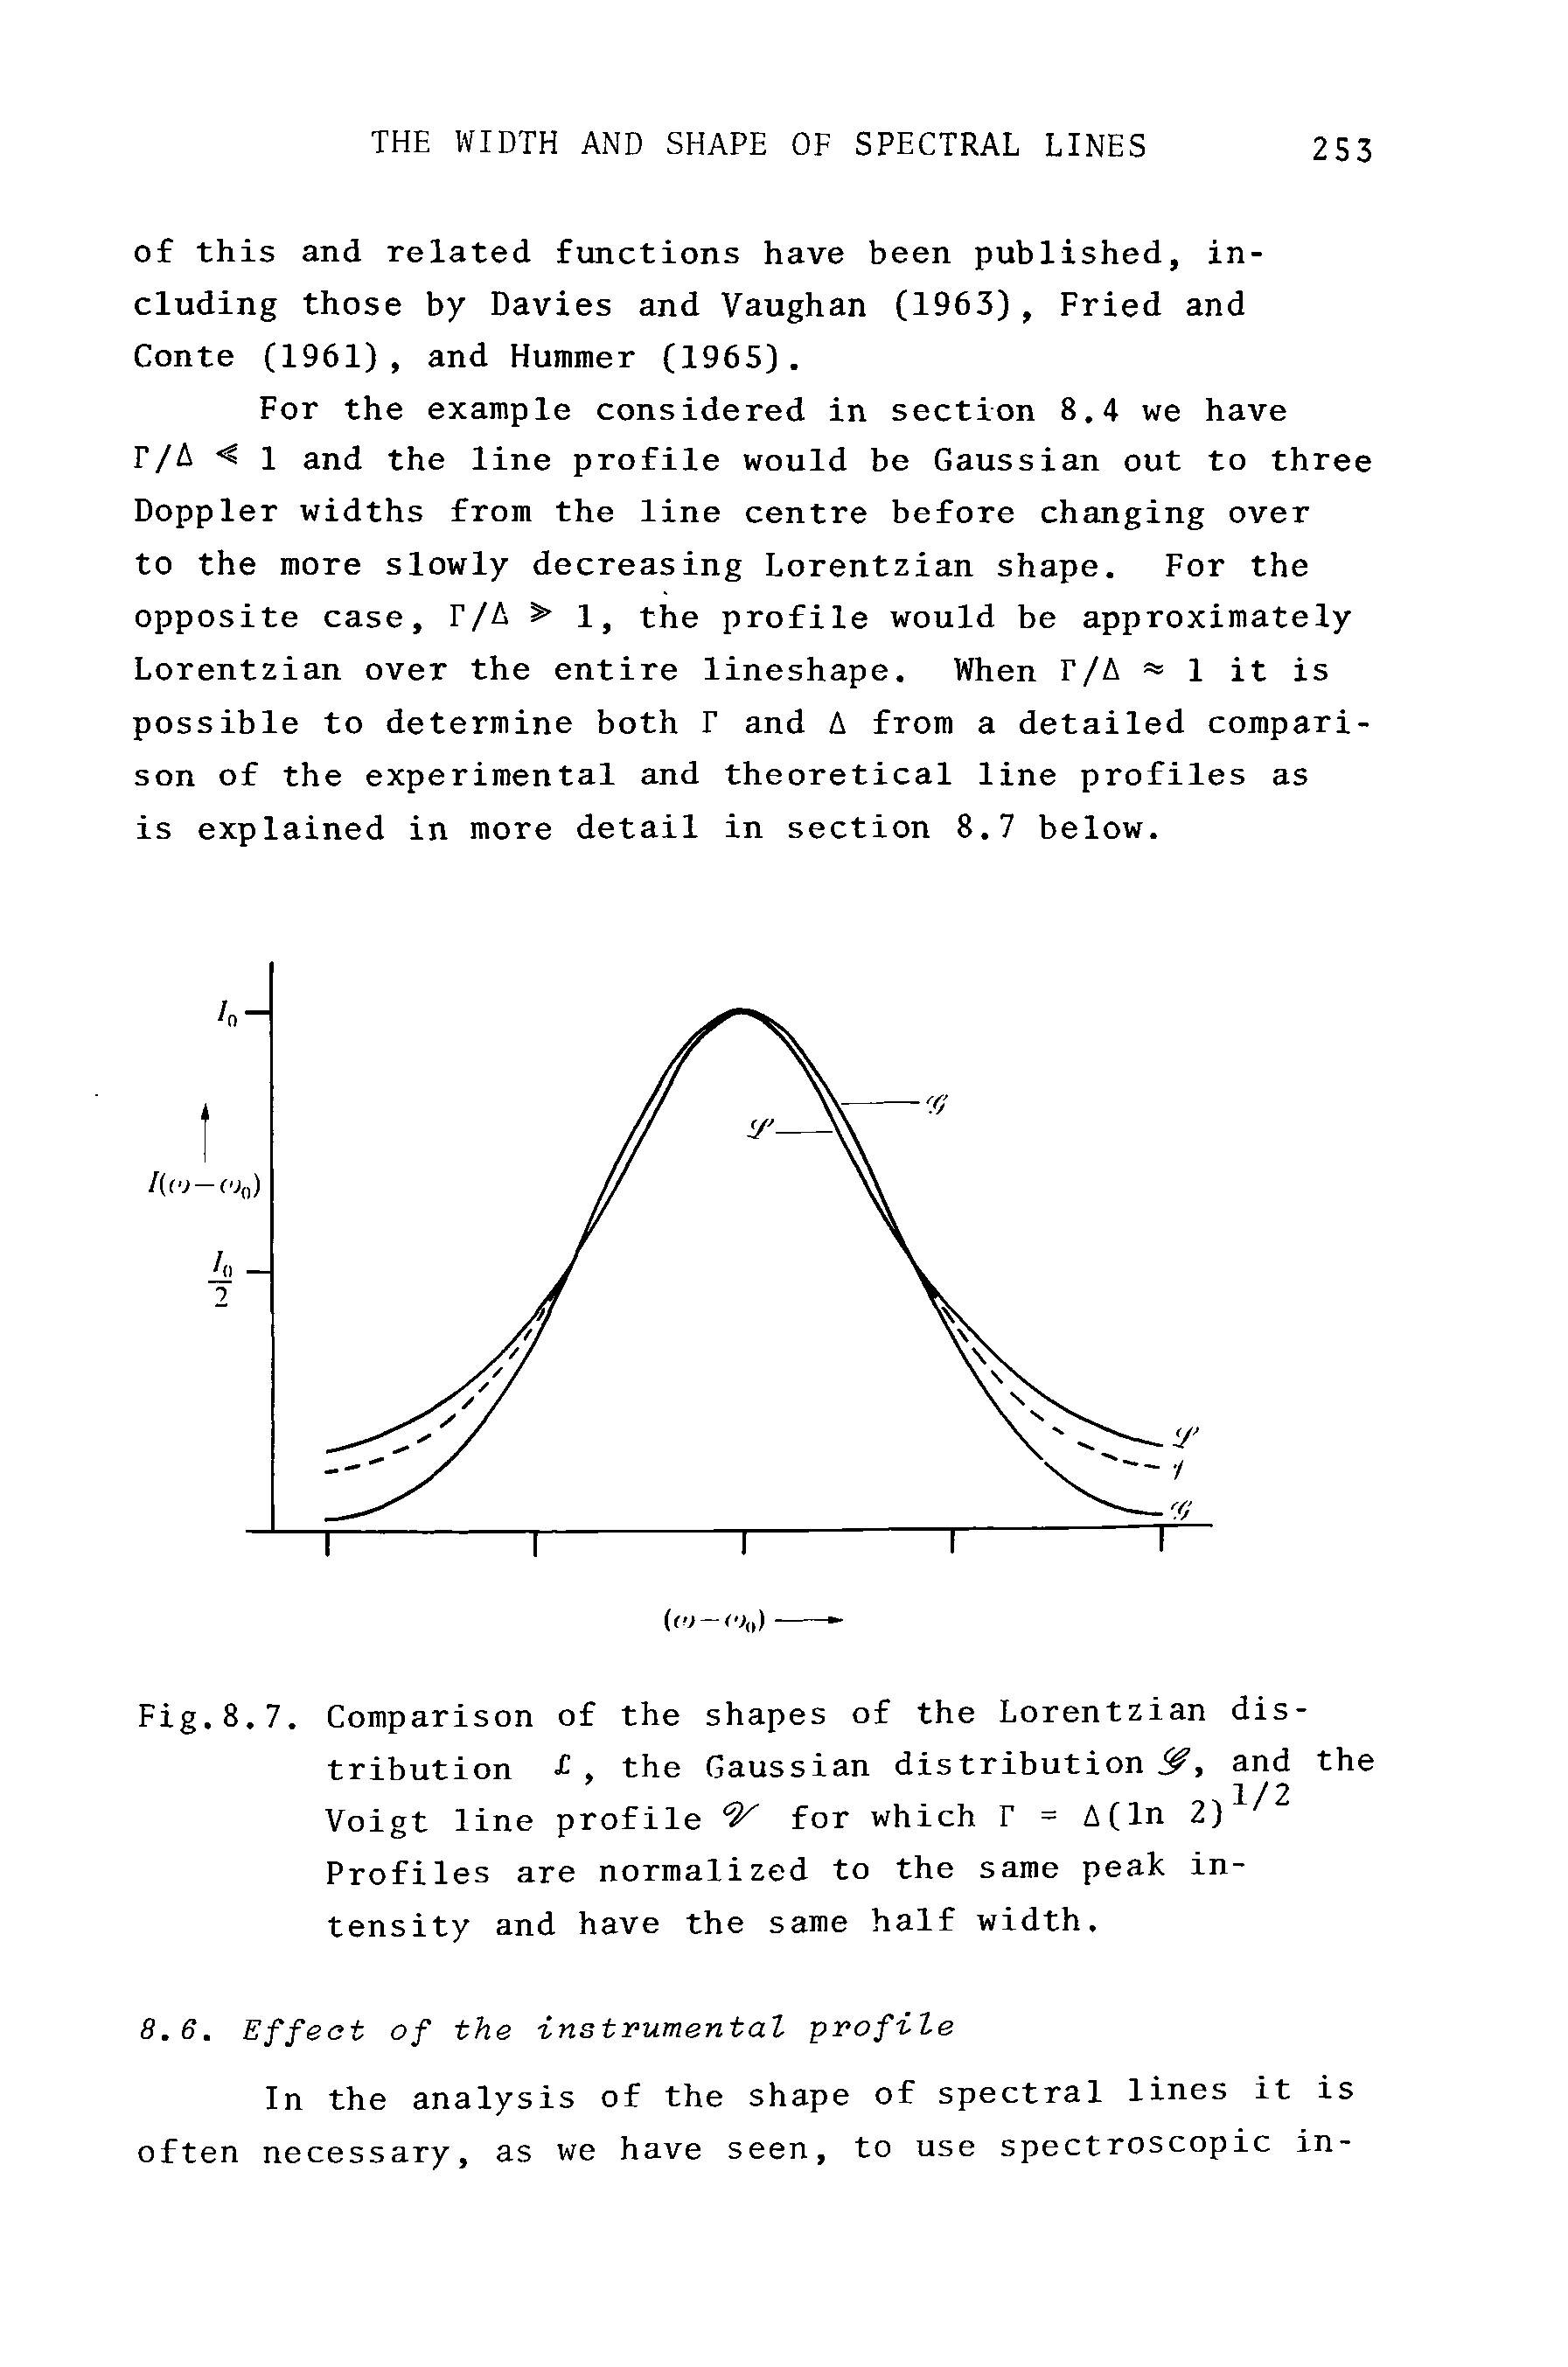 Fig.8.7. Comparison of the shapes of the Lorentzian distribution T, the Gaussian distribution and the Voigt line profile for which T = A(ln 2) Profiles are normalized to the same peak intensity and have the same half width.